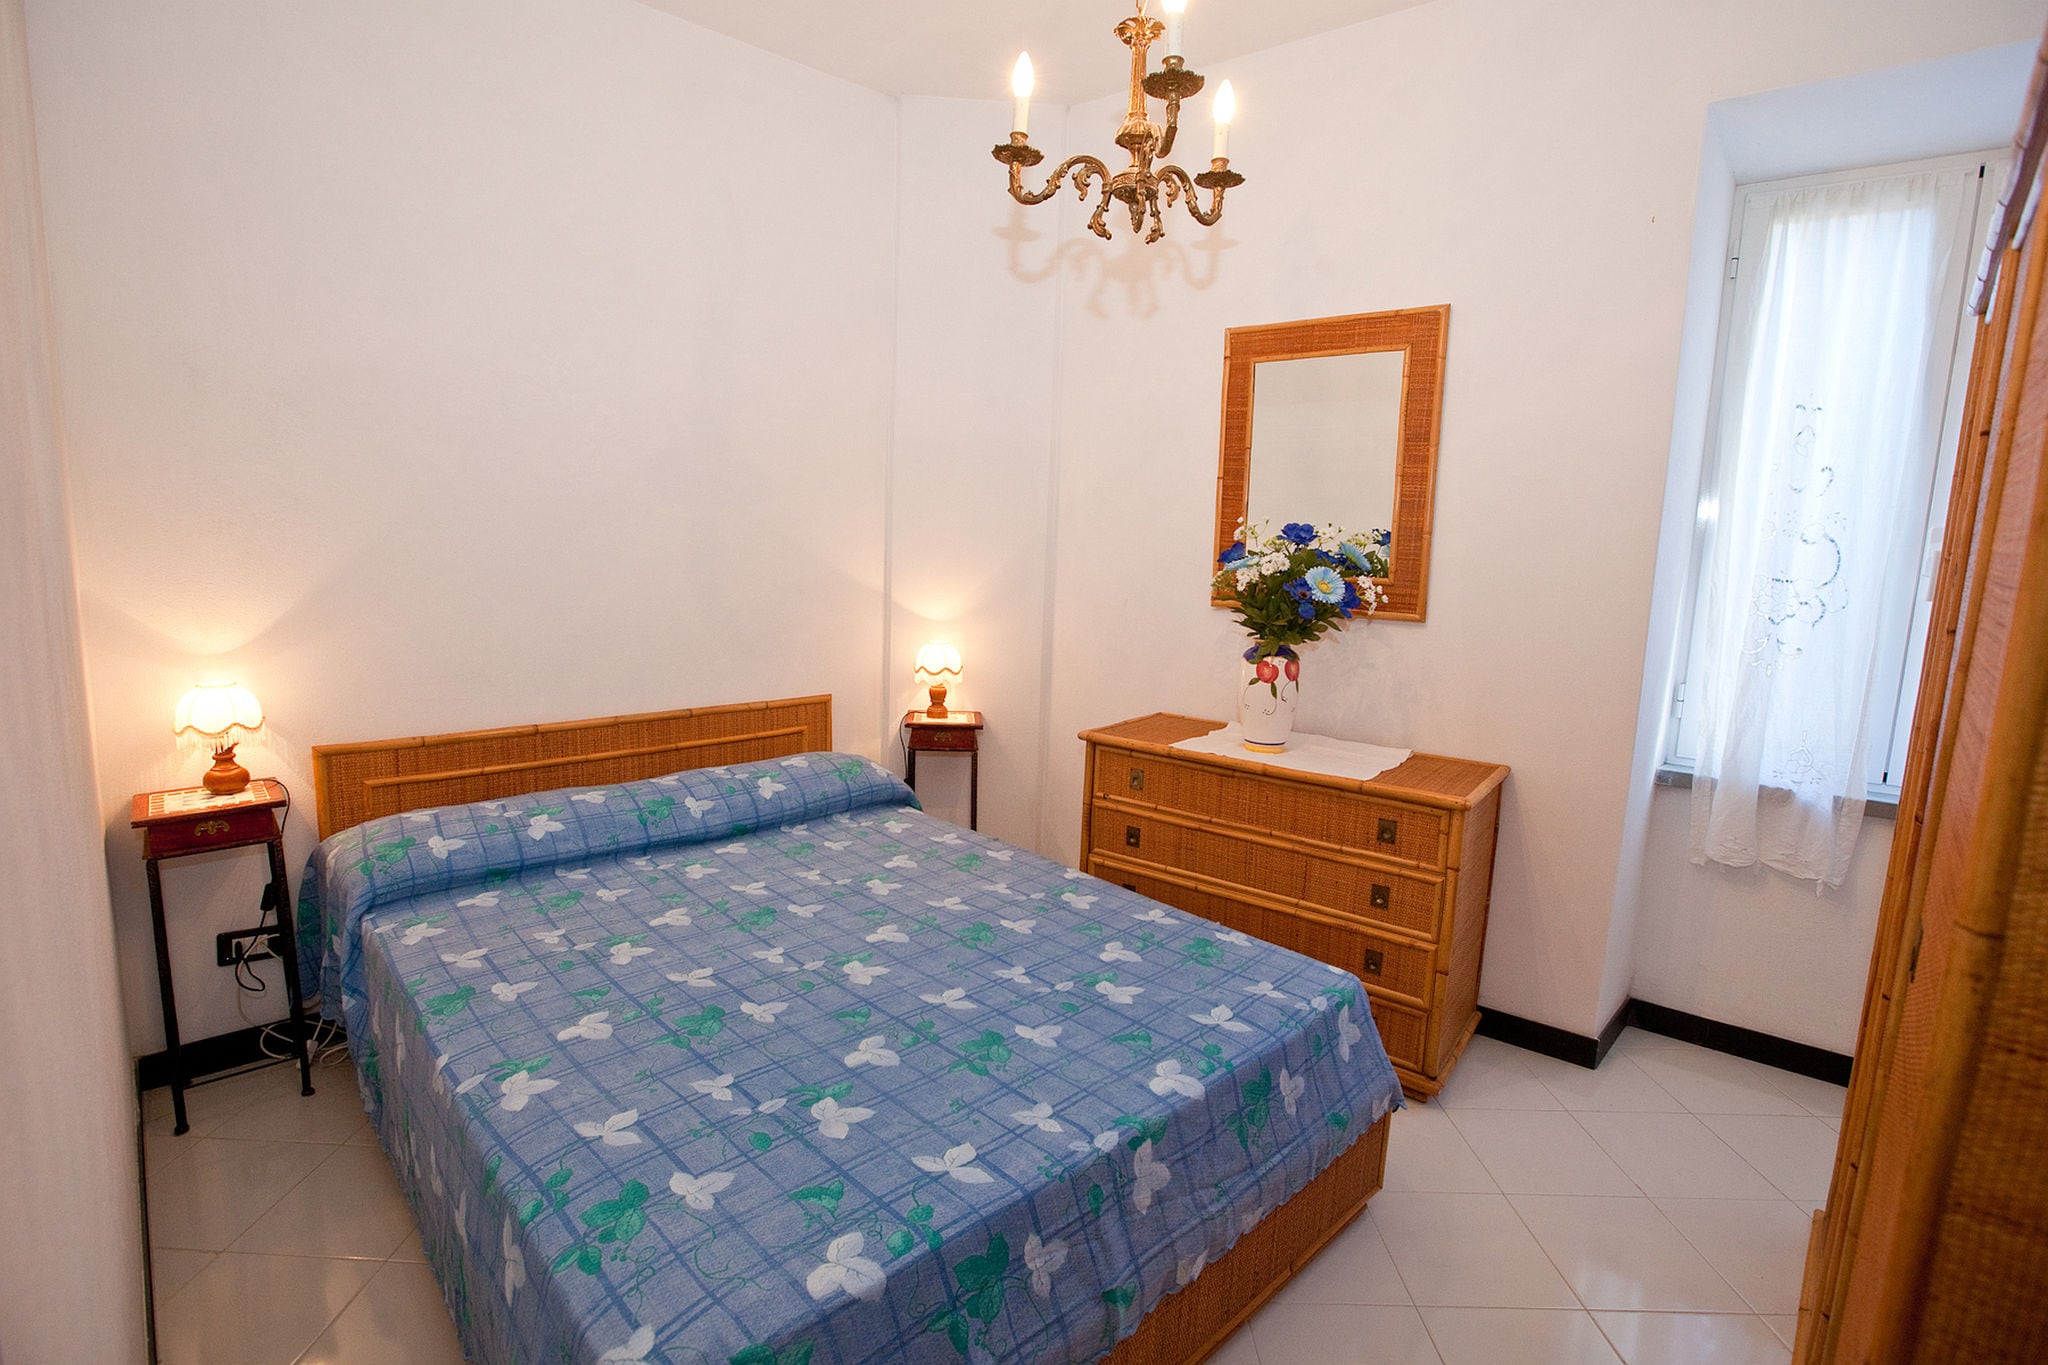 Flat with terrace 15km from Cinque Terre